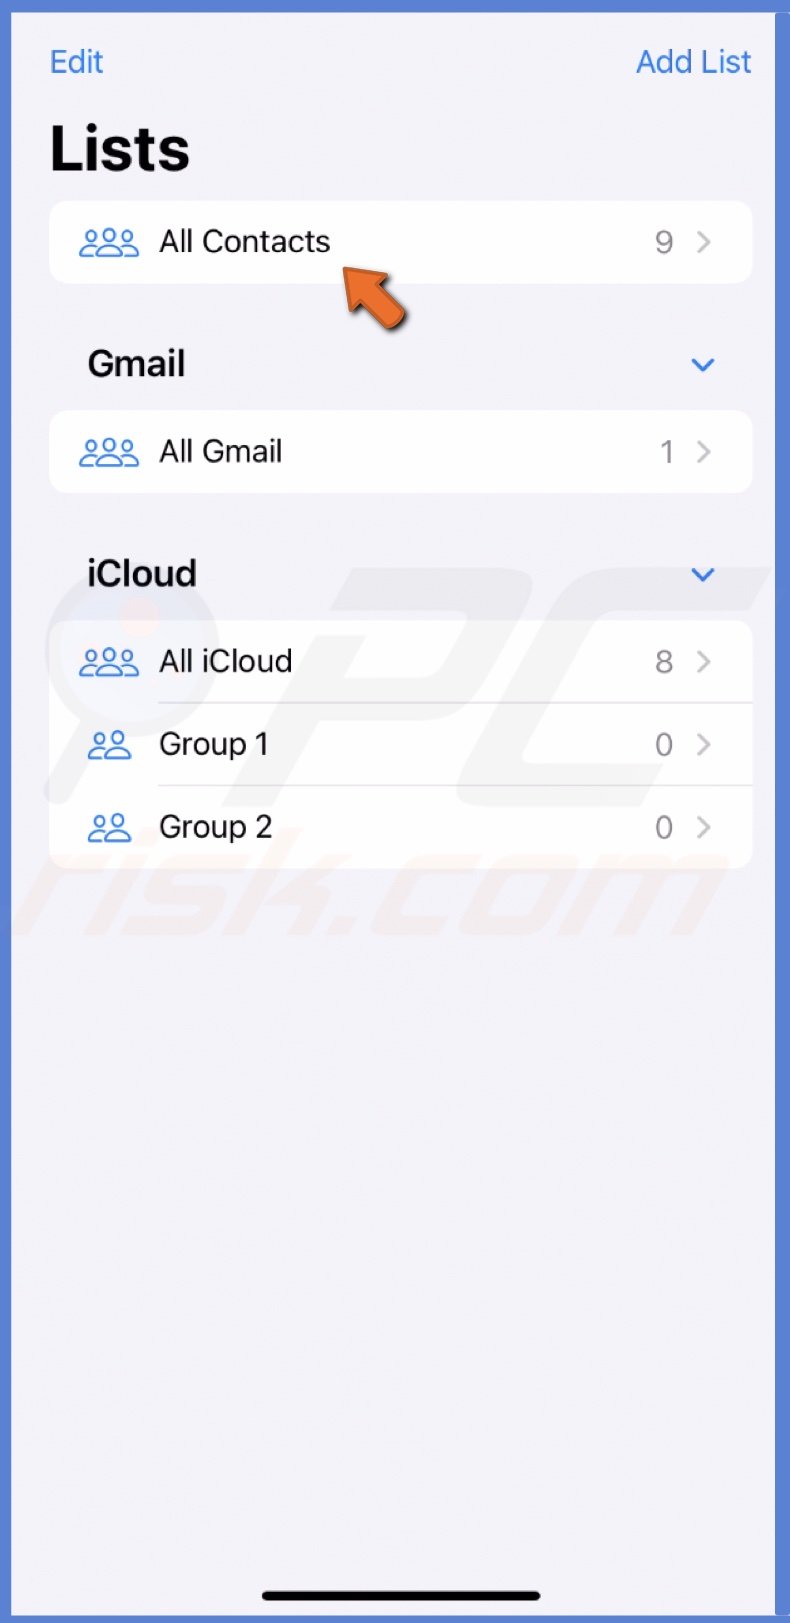 Select All Contacts